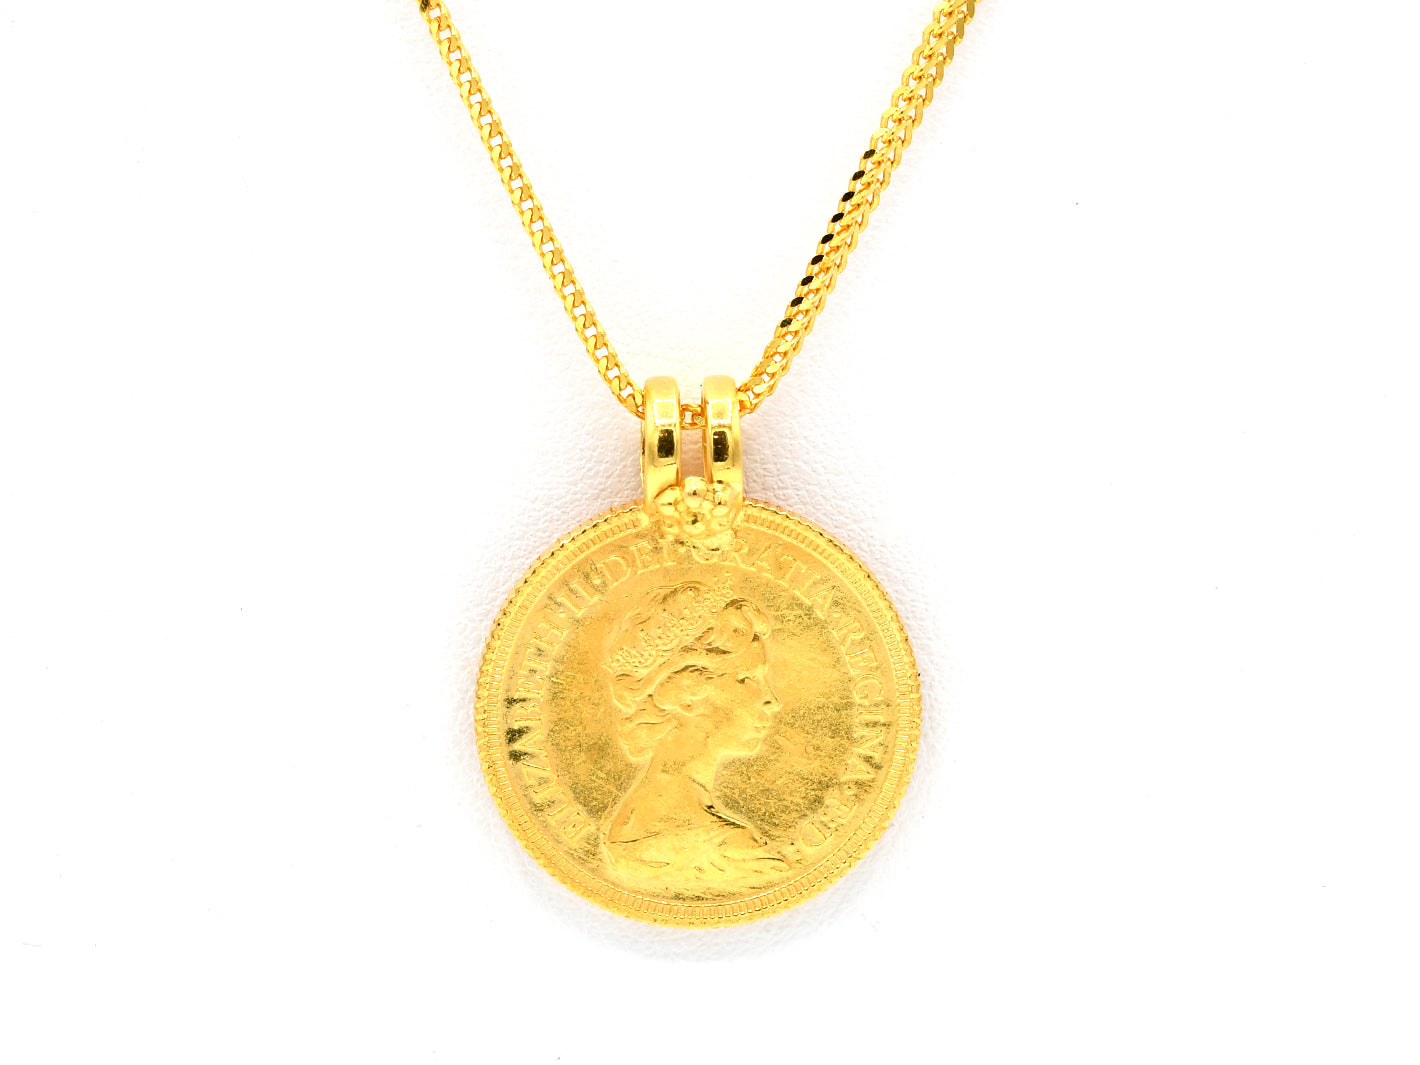 22ct Gold Sovereign Pendant - Roop Darshan